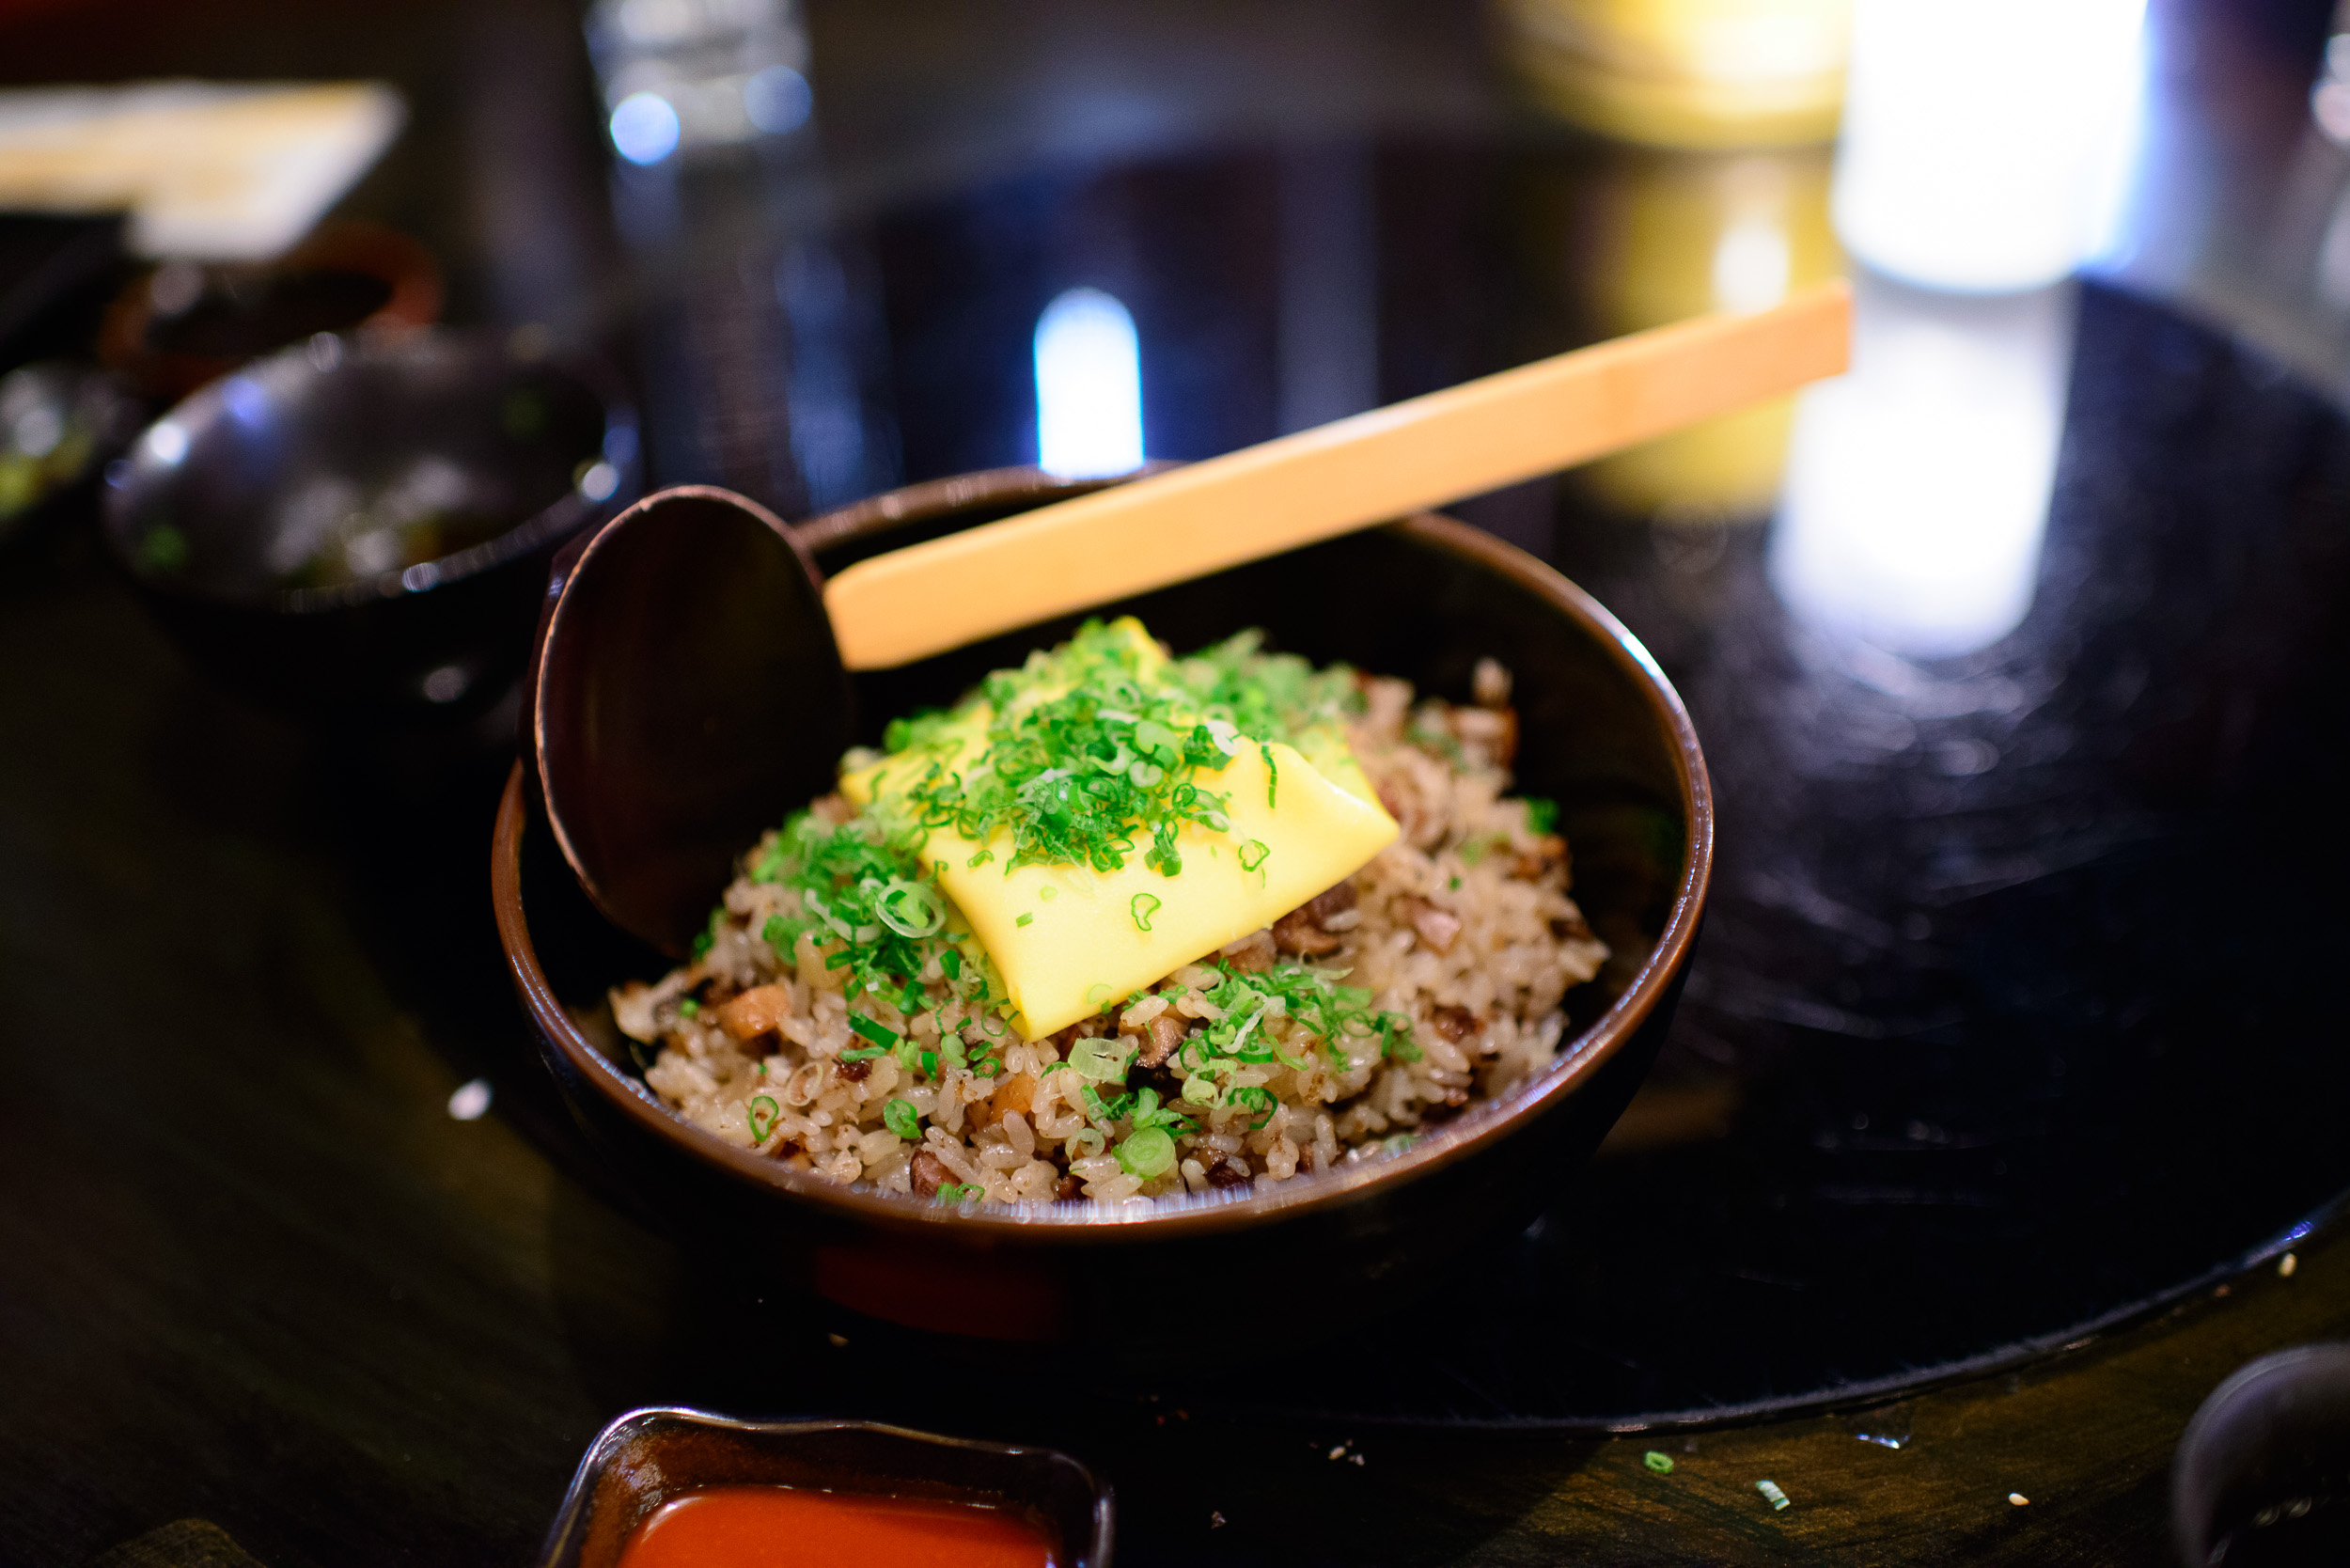 Bone marrow and oxtail fried rice